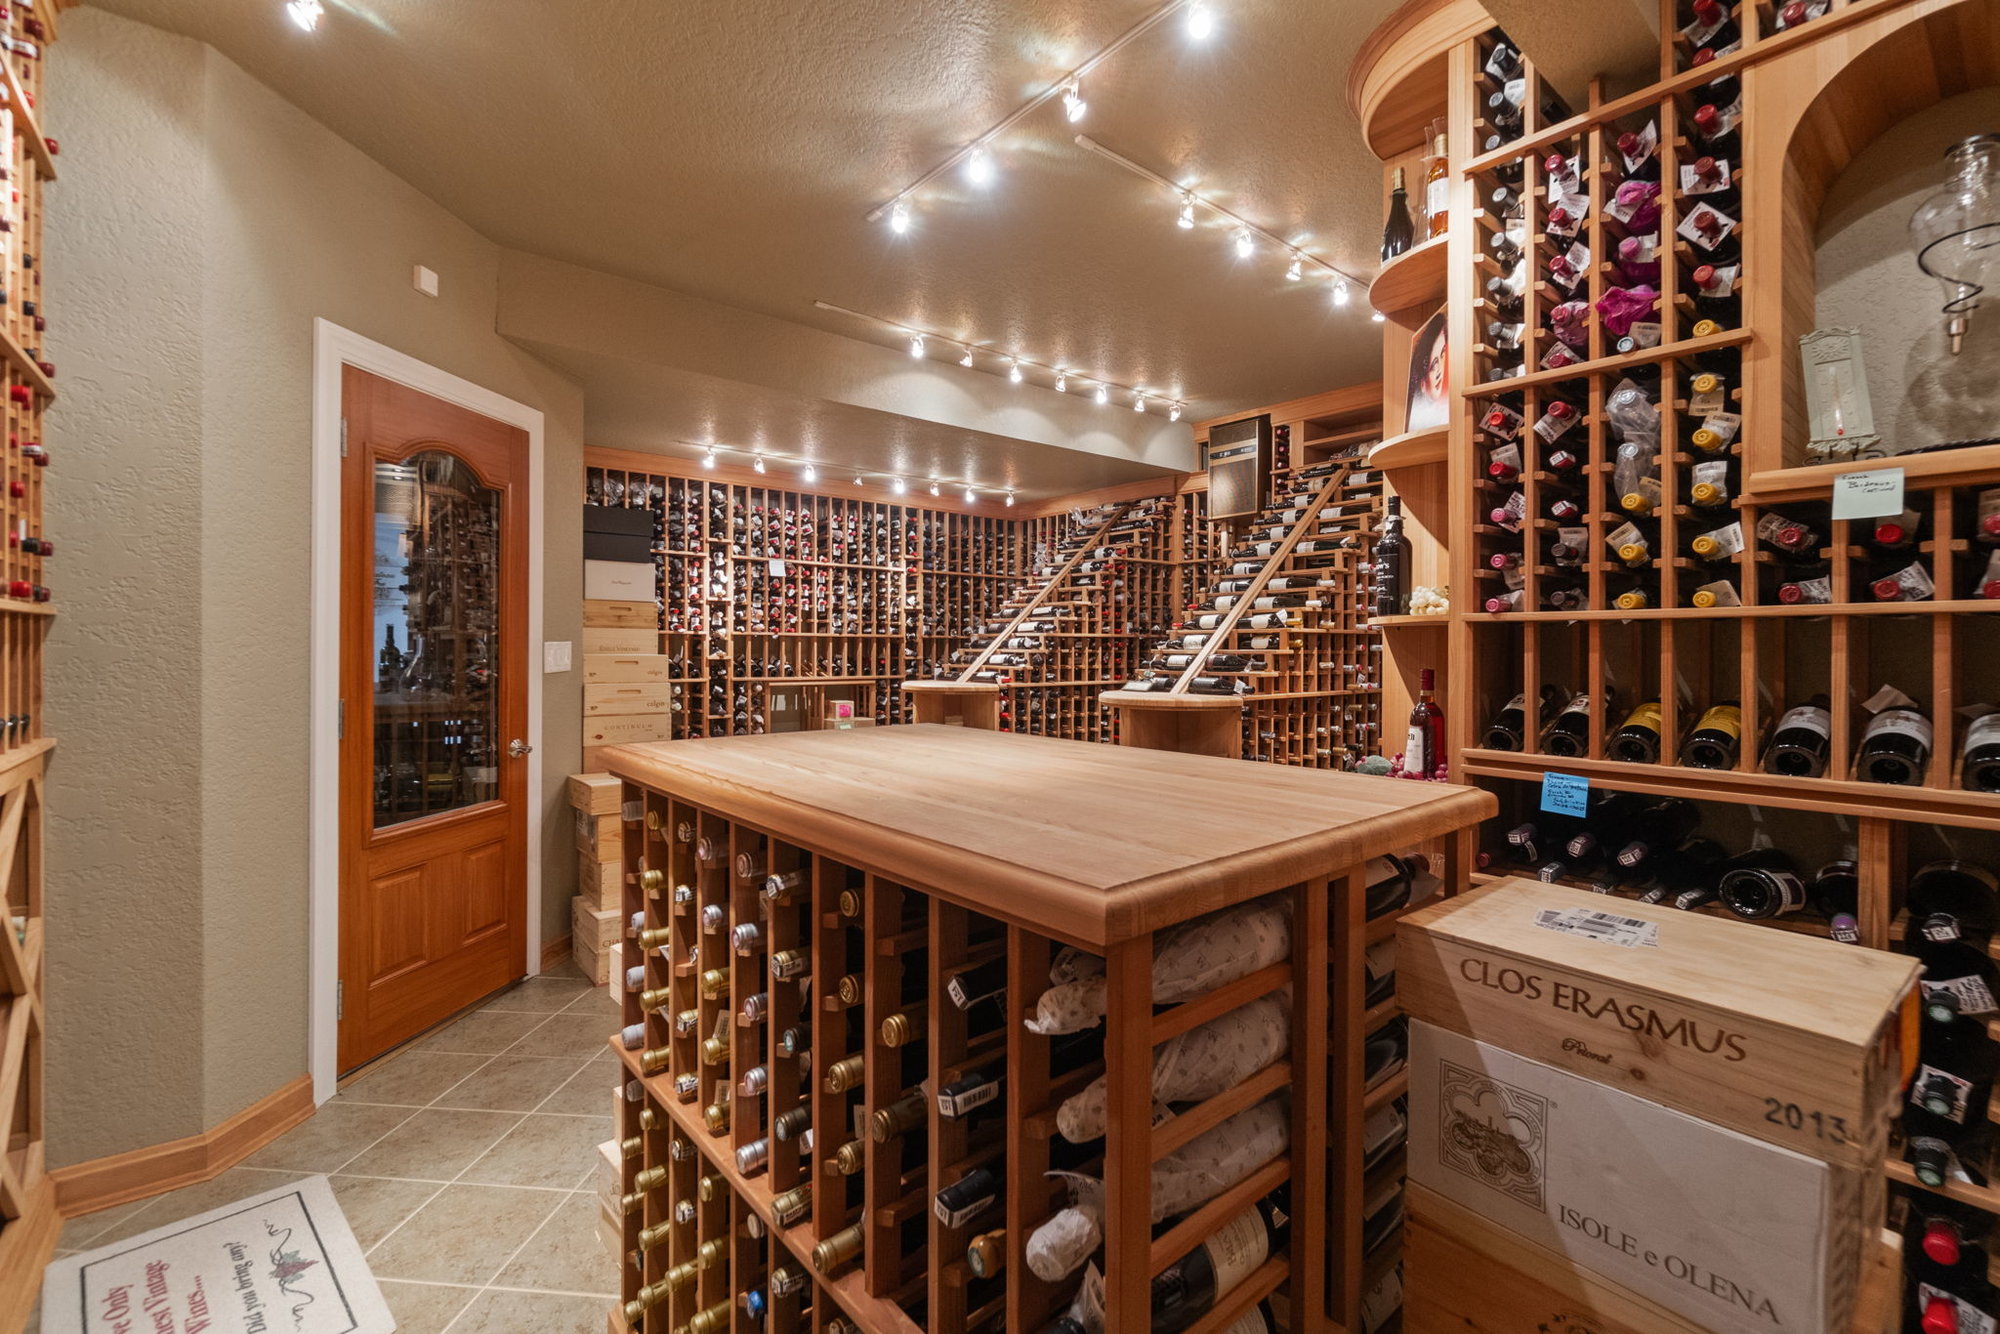 Calling all Wine Enthusiasts. This Custom Built Home has the Wine Cellar of Your Dreams!